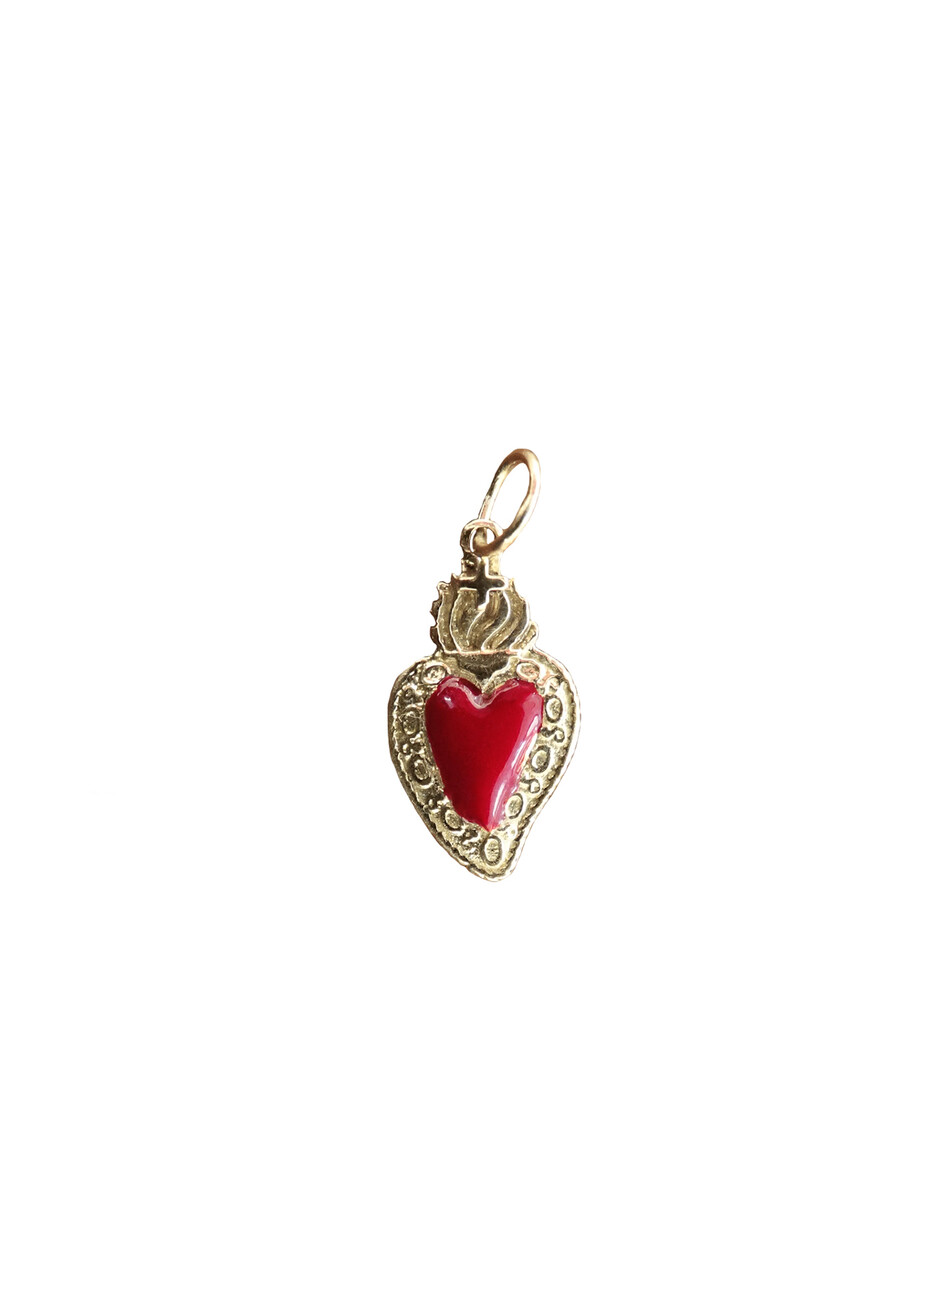 Large sacred heart charm in 18kt solid gold